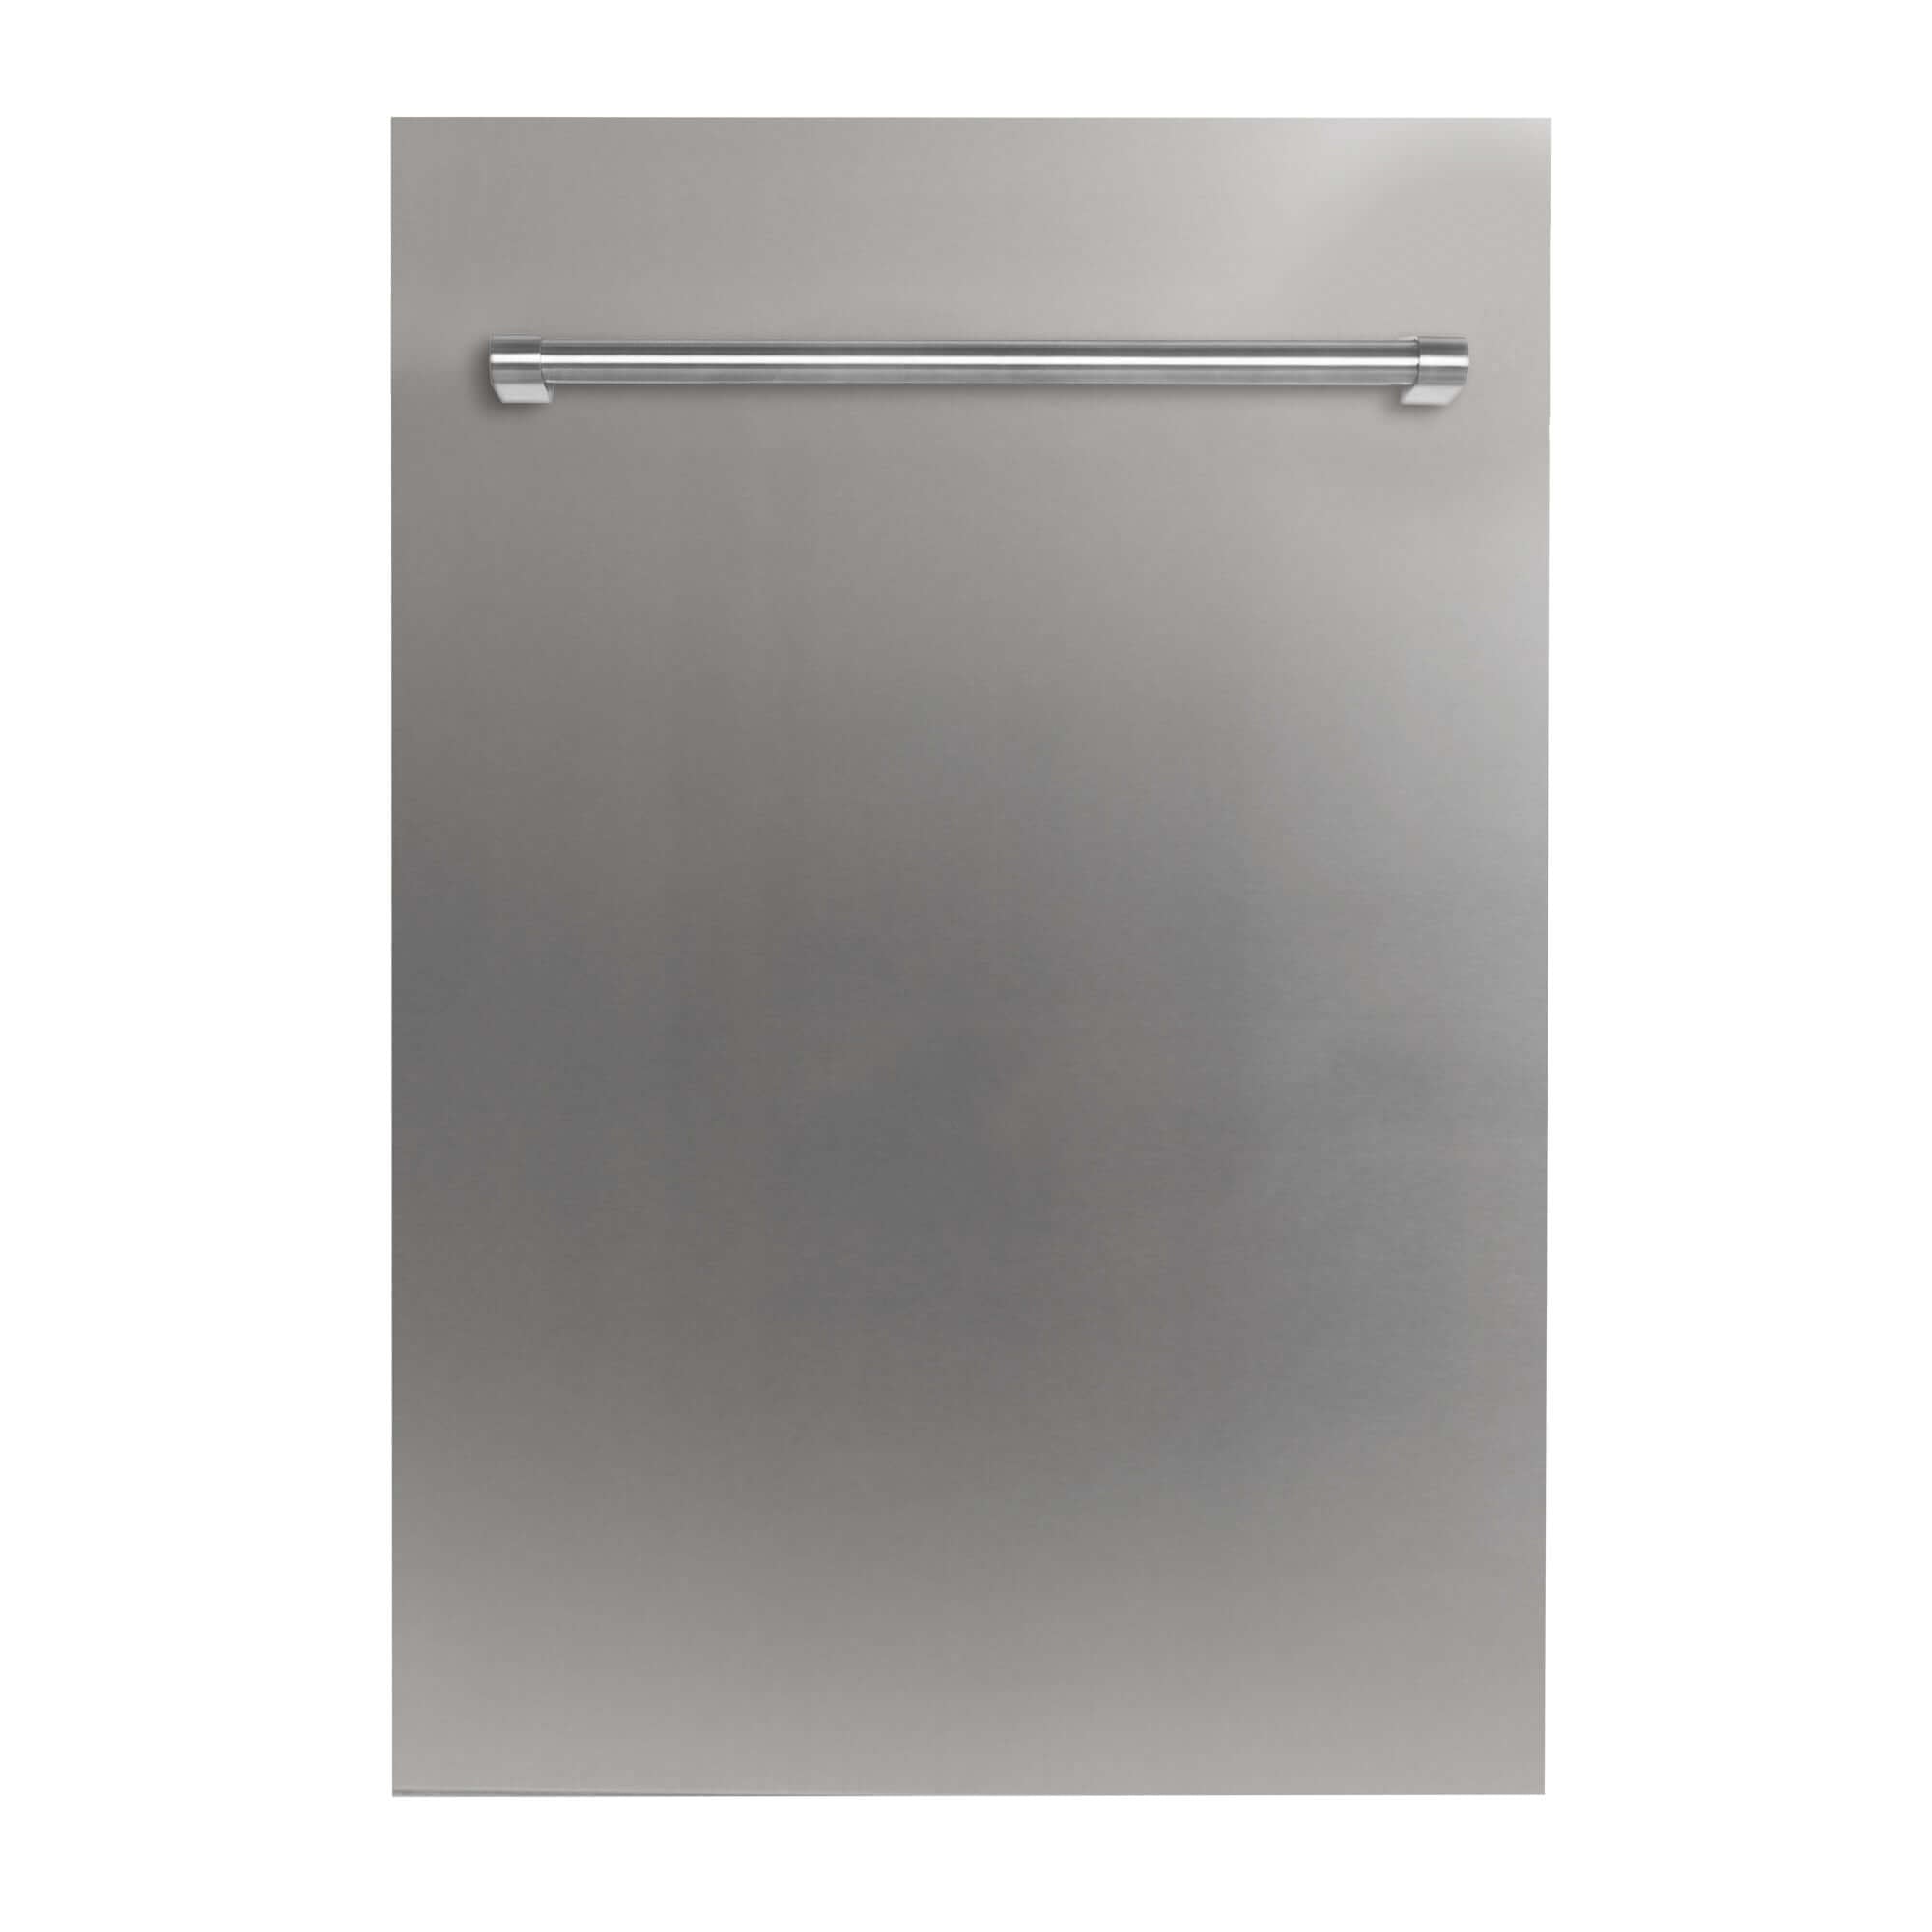 ZLINE 18 in. Compact Stainless Steel Top Control Built-In Dishwasher with Stainless Steel Tub and Traditional Style Handle, 52dBa (DW-304-H-18) front, closed.